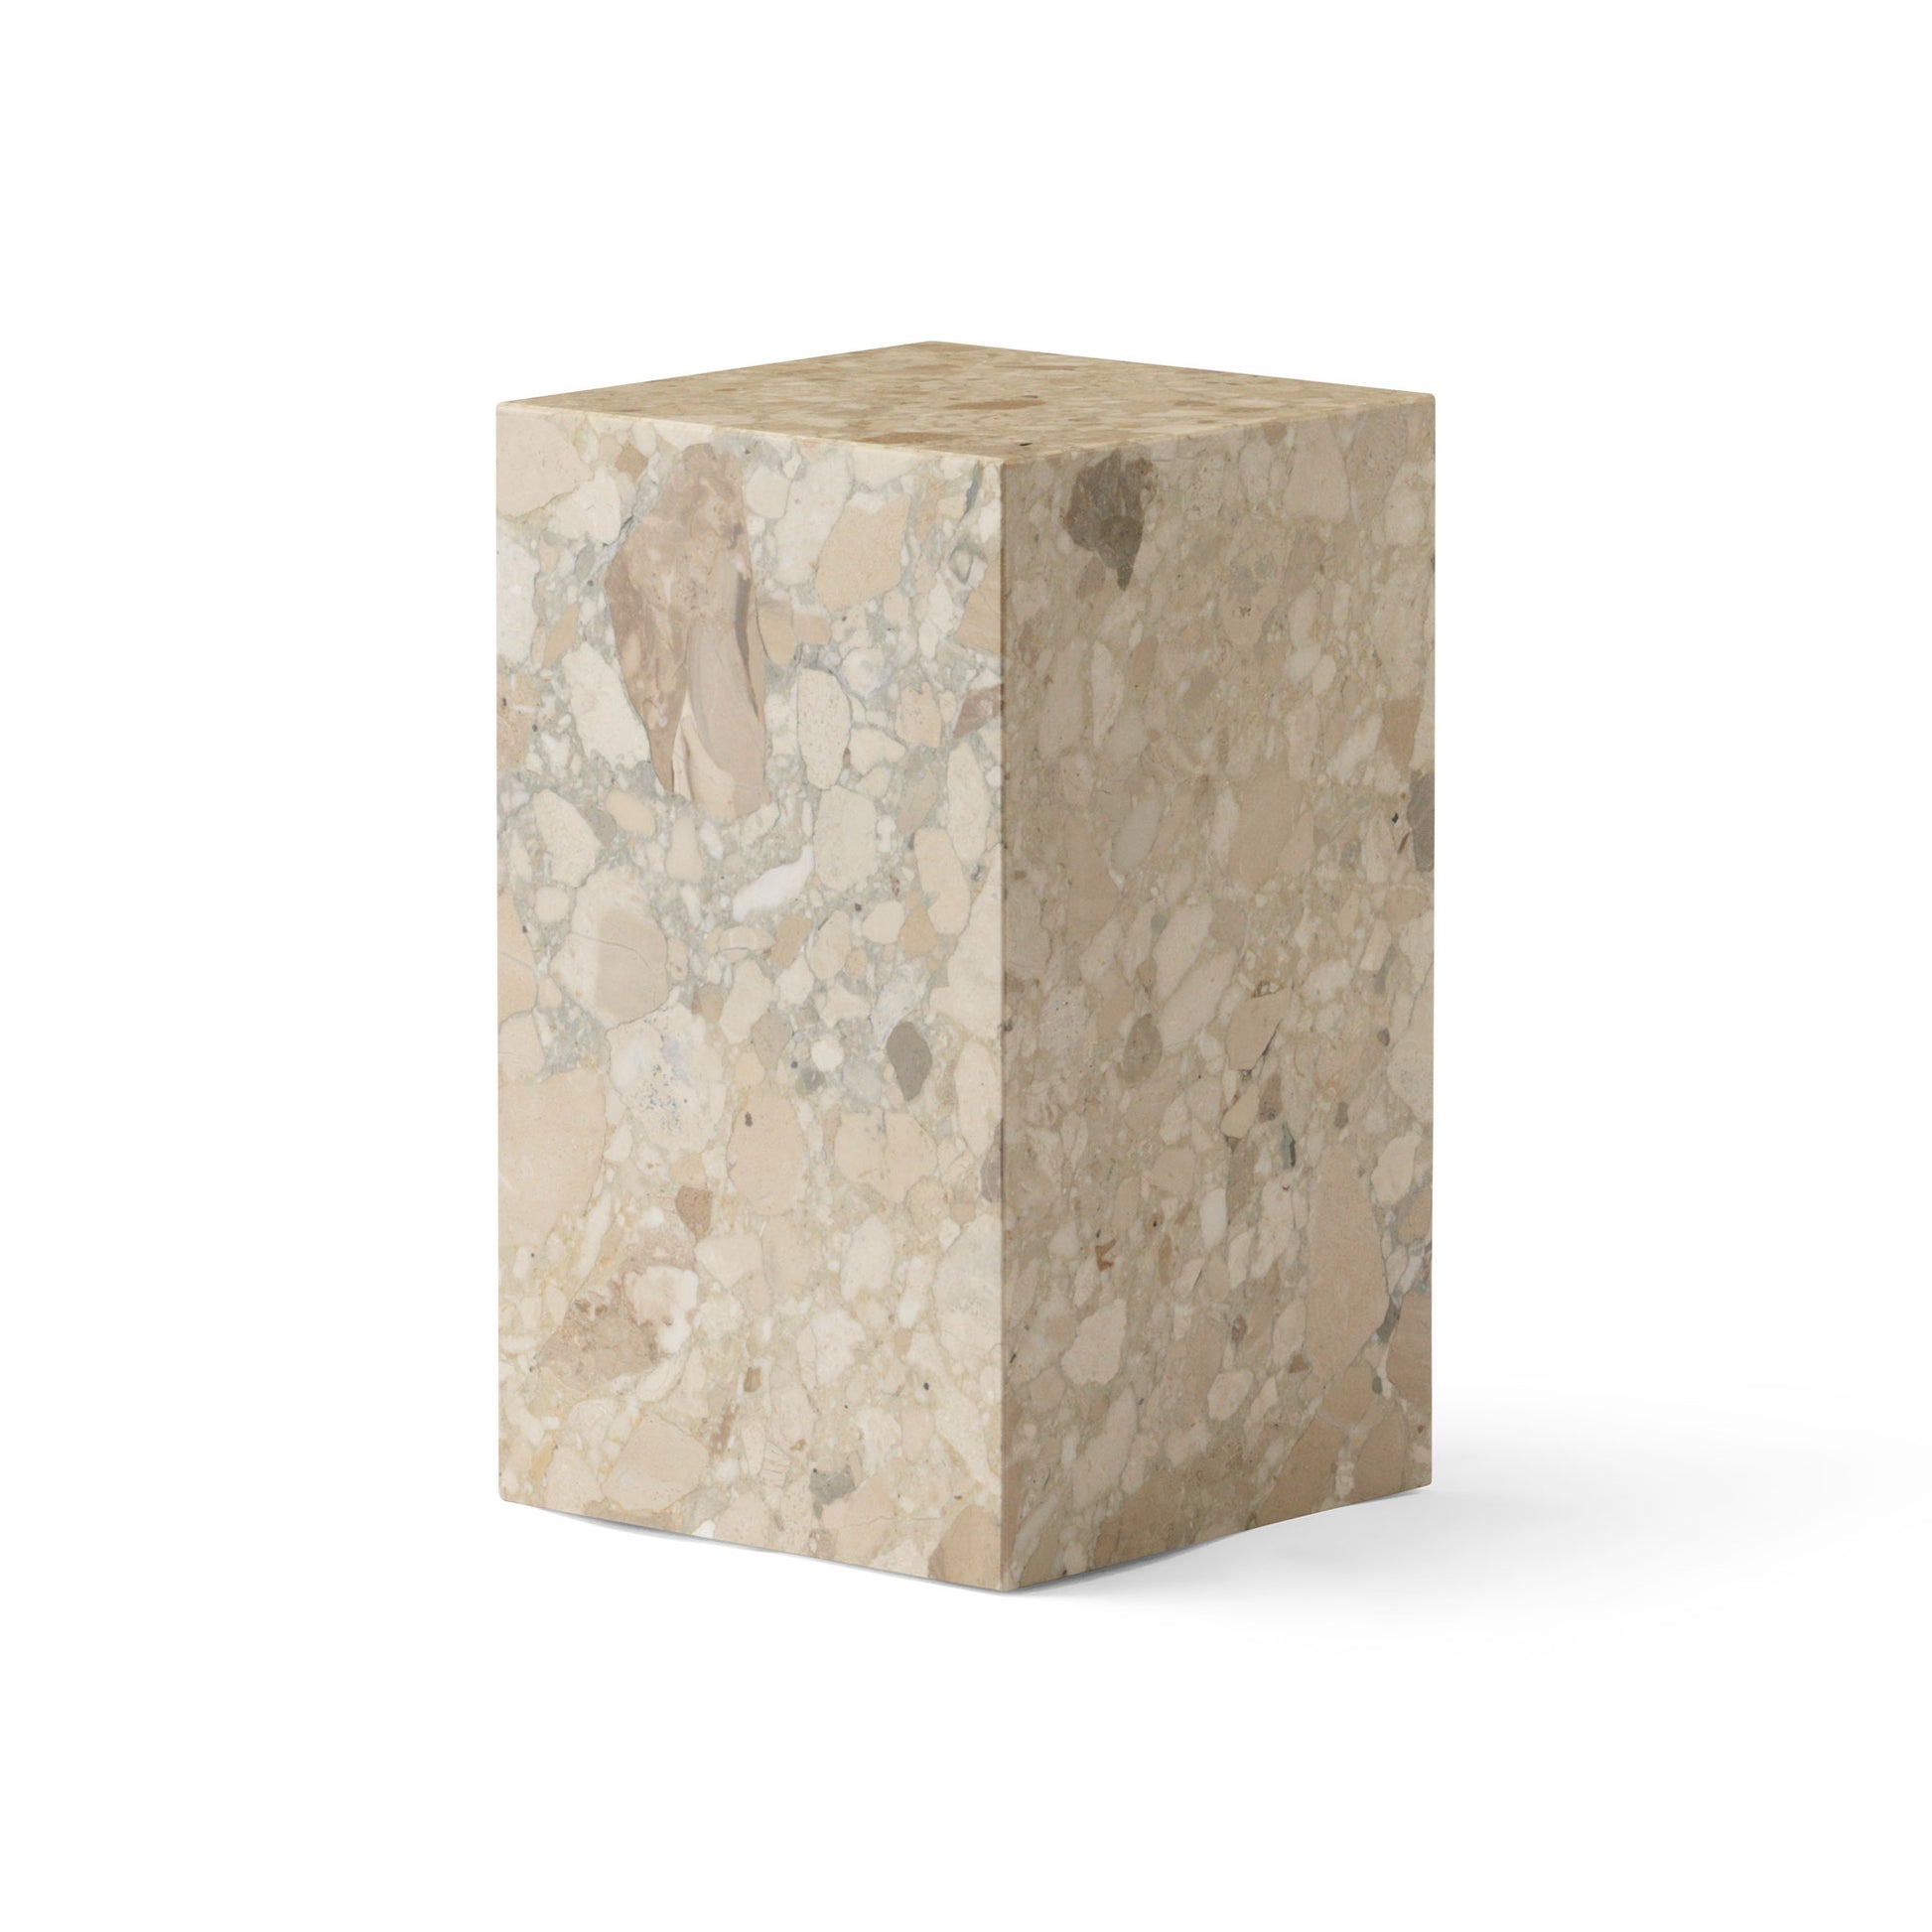 Plinth Coffee Table High by Audo #Kunis Breccia Marble